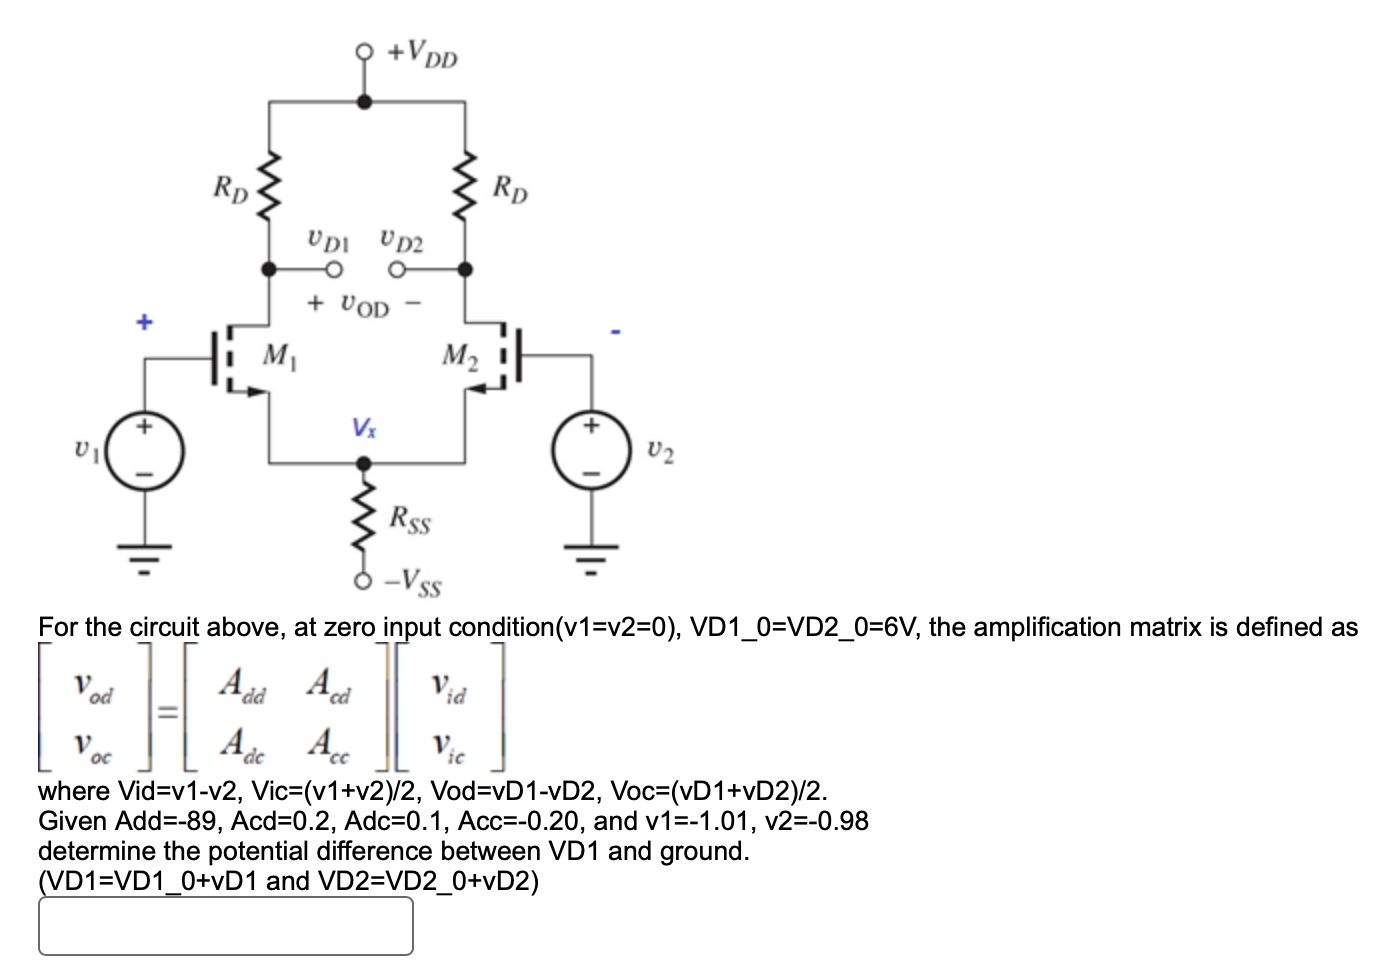 For the circuit above, at zero input condition( (v1 = v2 = 0), VD1_0 = VD2_0 = 6 V, the amplification matrix is defined as[vod voc] = [Add Acd Adc Acc][vid vic]where Vid = v1-v2, Vic = (v1+v2)/2, Vod = vD1-vD2, Voc = (vD1+vD2)/2. Given Add = -89, Acd = 0.2, Adc = 0.1, Acc = −0.20, and v1 = −1.01, v2 = −0.98 determine the potential difference between VD1 and ground. (VD1 = VD1_0+vD1 and VD2 = VD2_0+vD2)